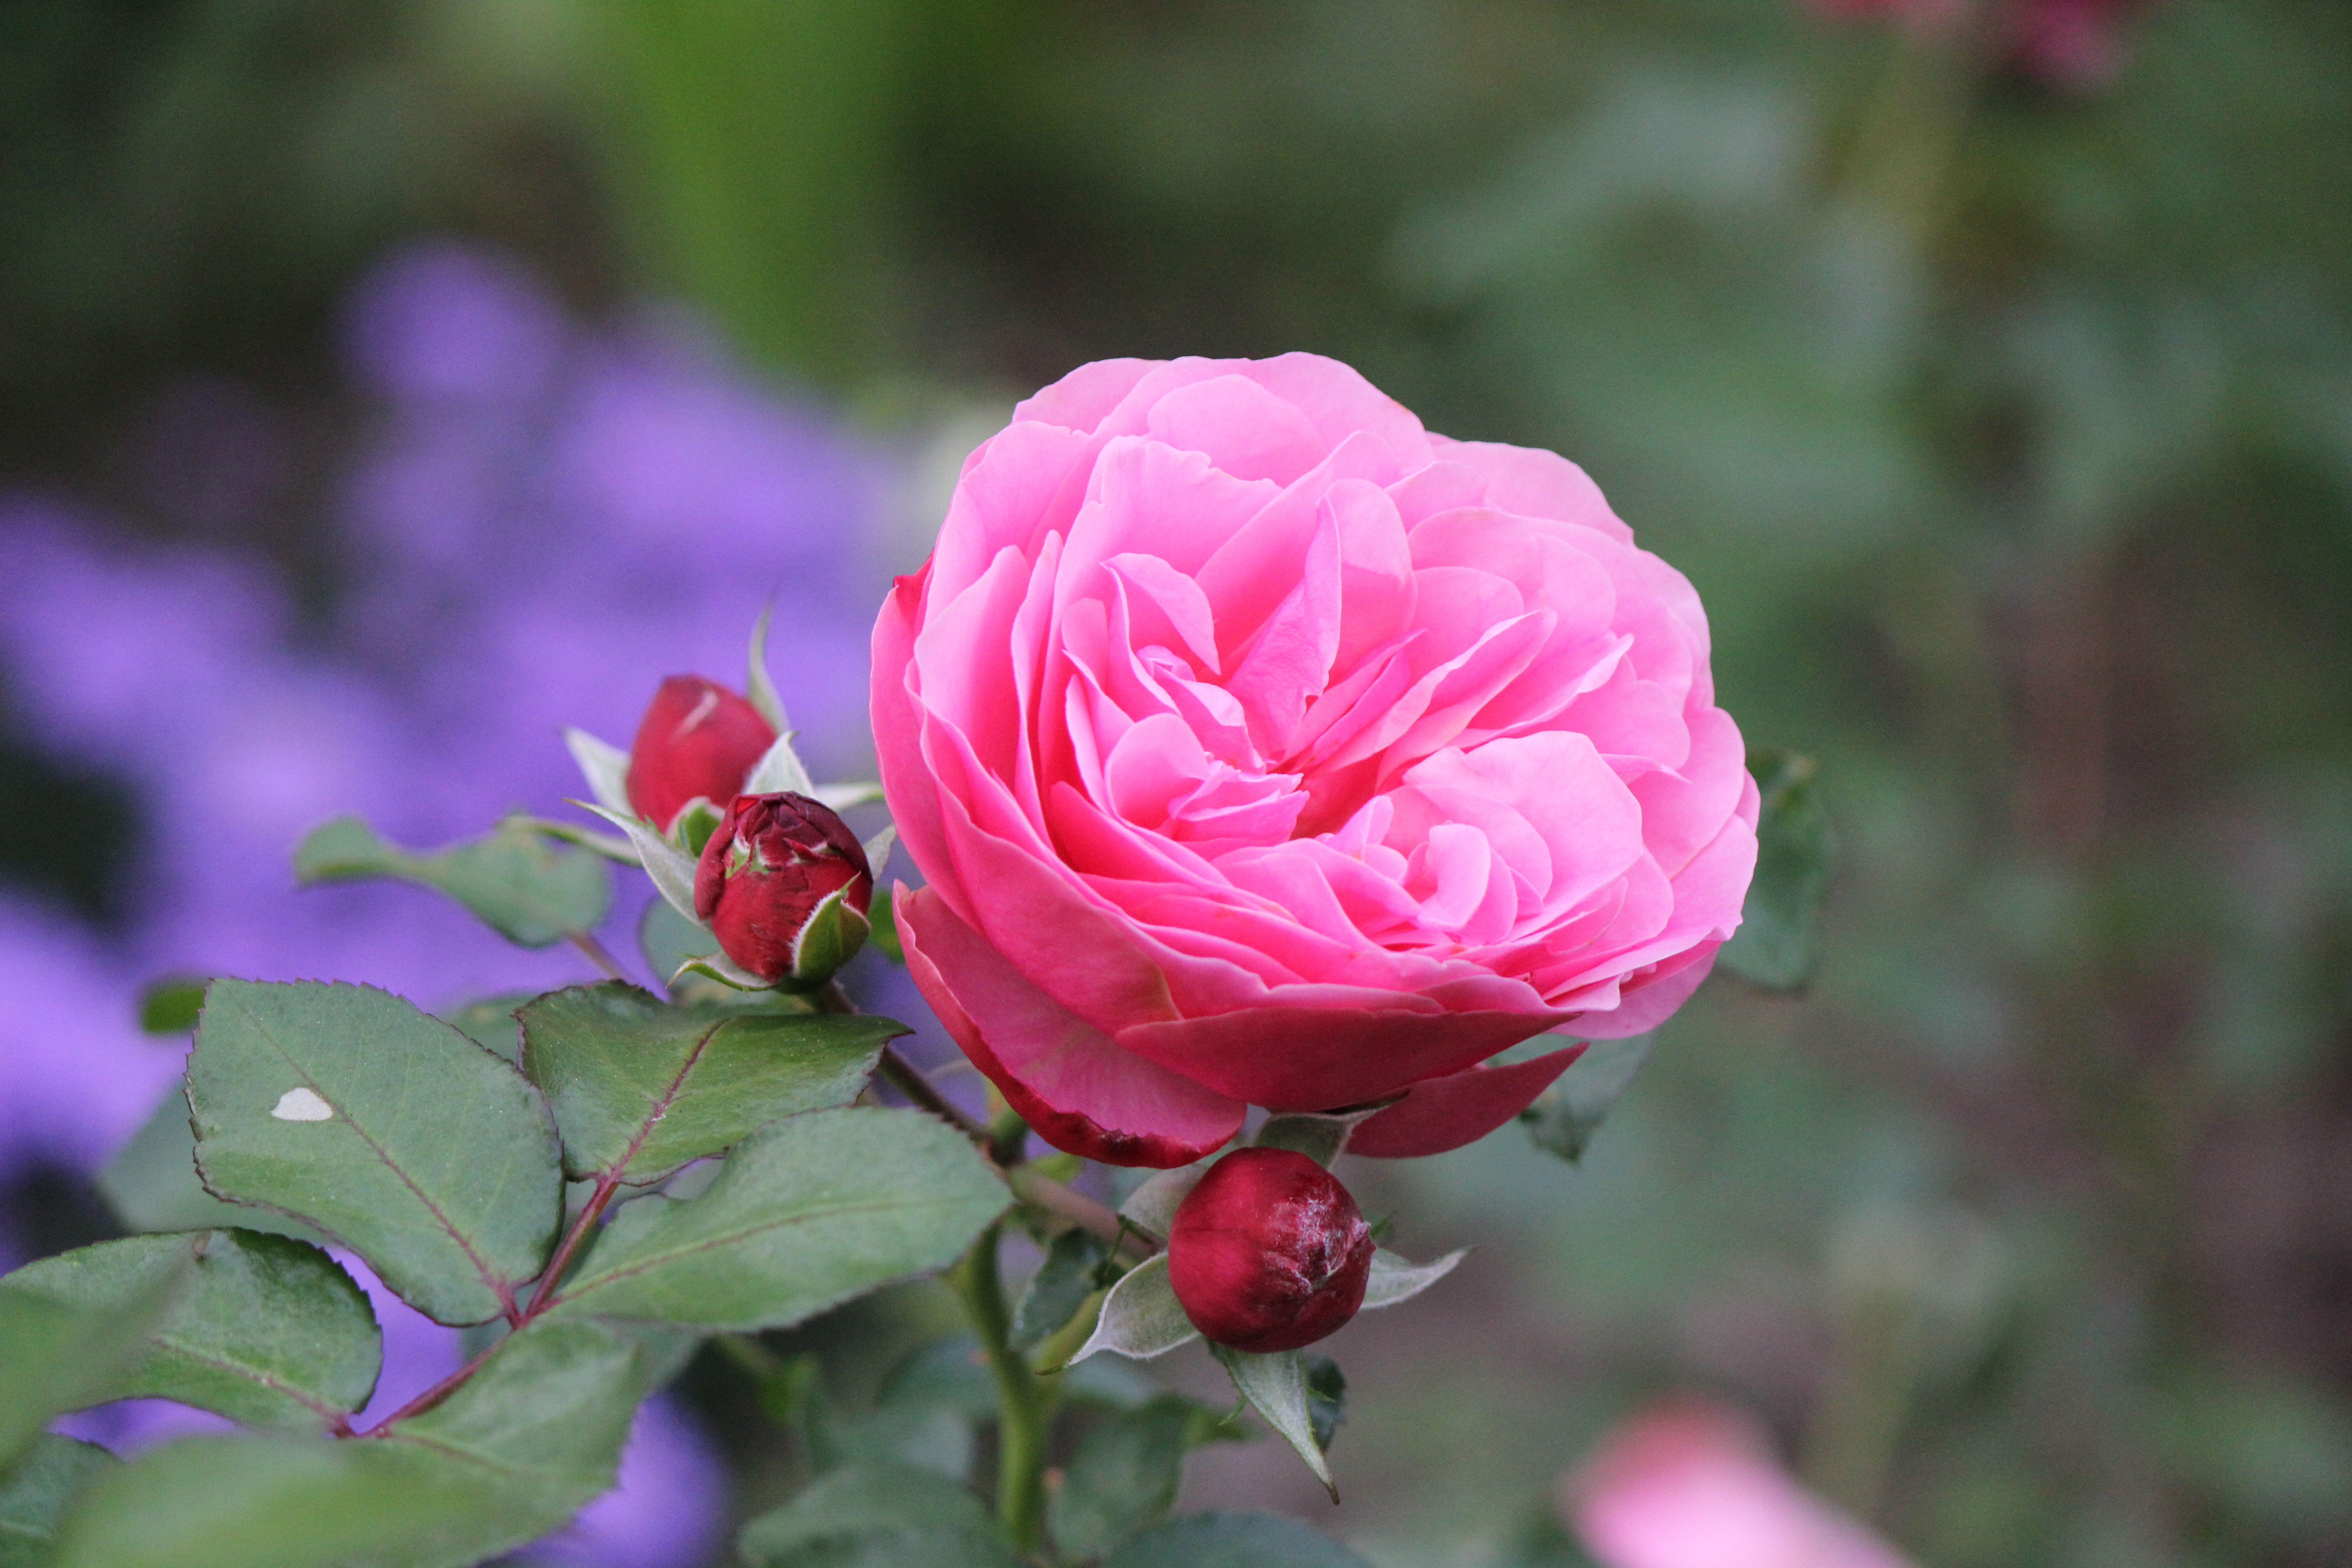 Pink rose with buds - cc0.photo